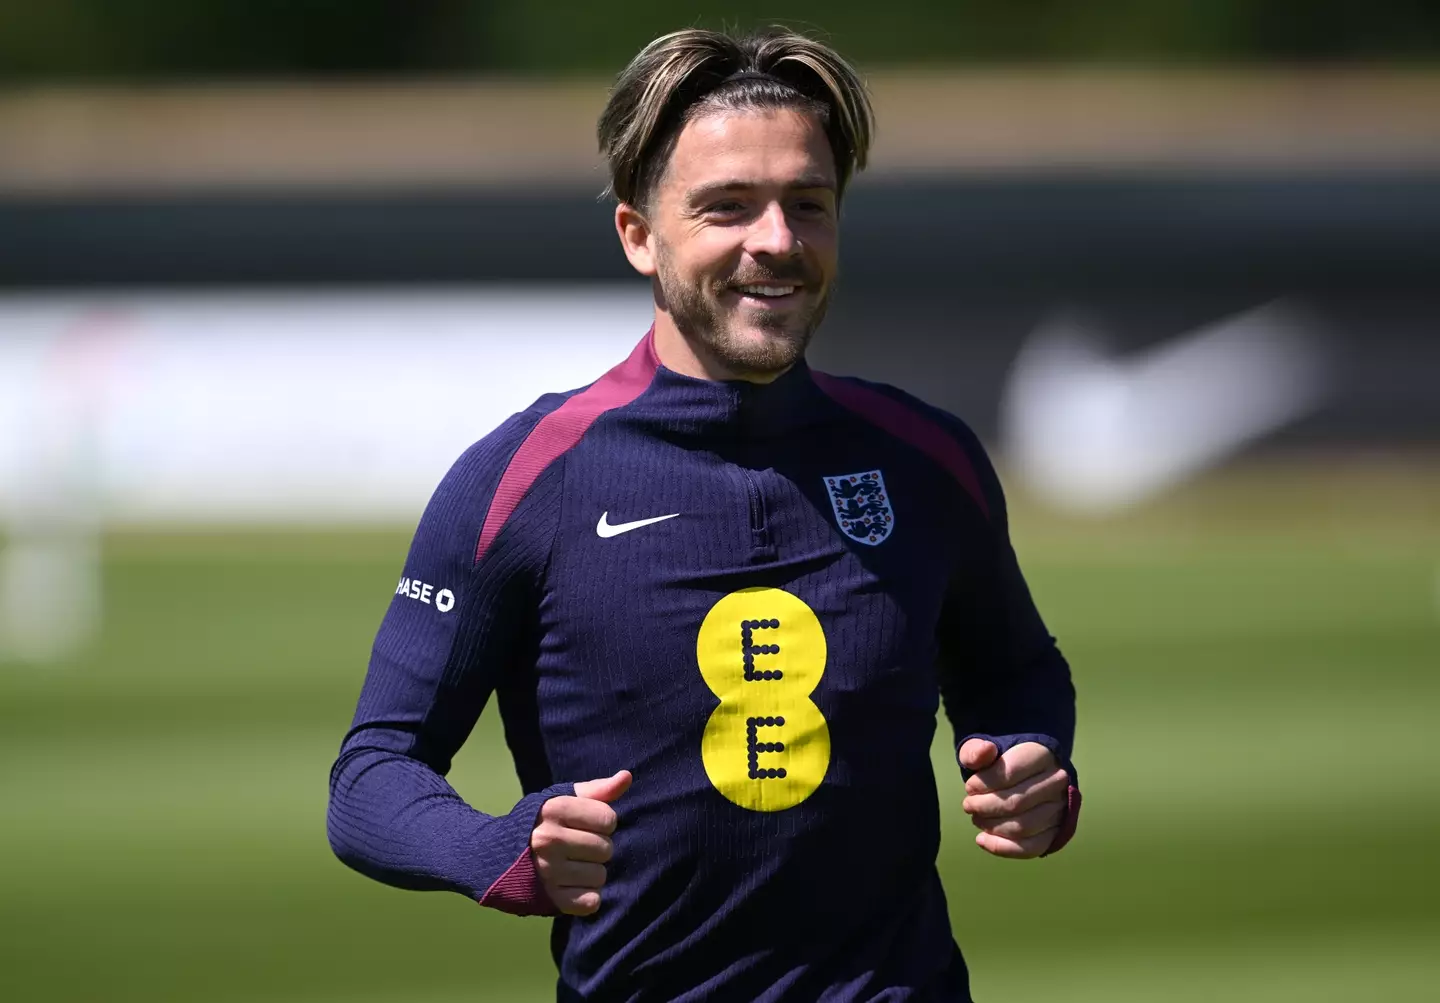 Jack Grealish was left out of England' 26-man squad (Getty)